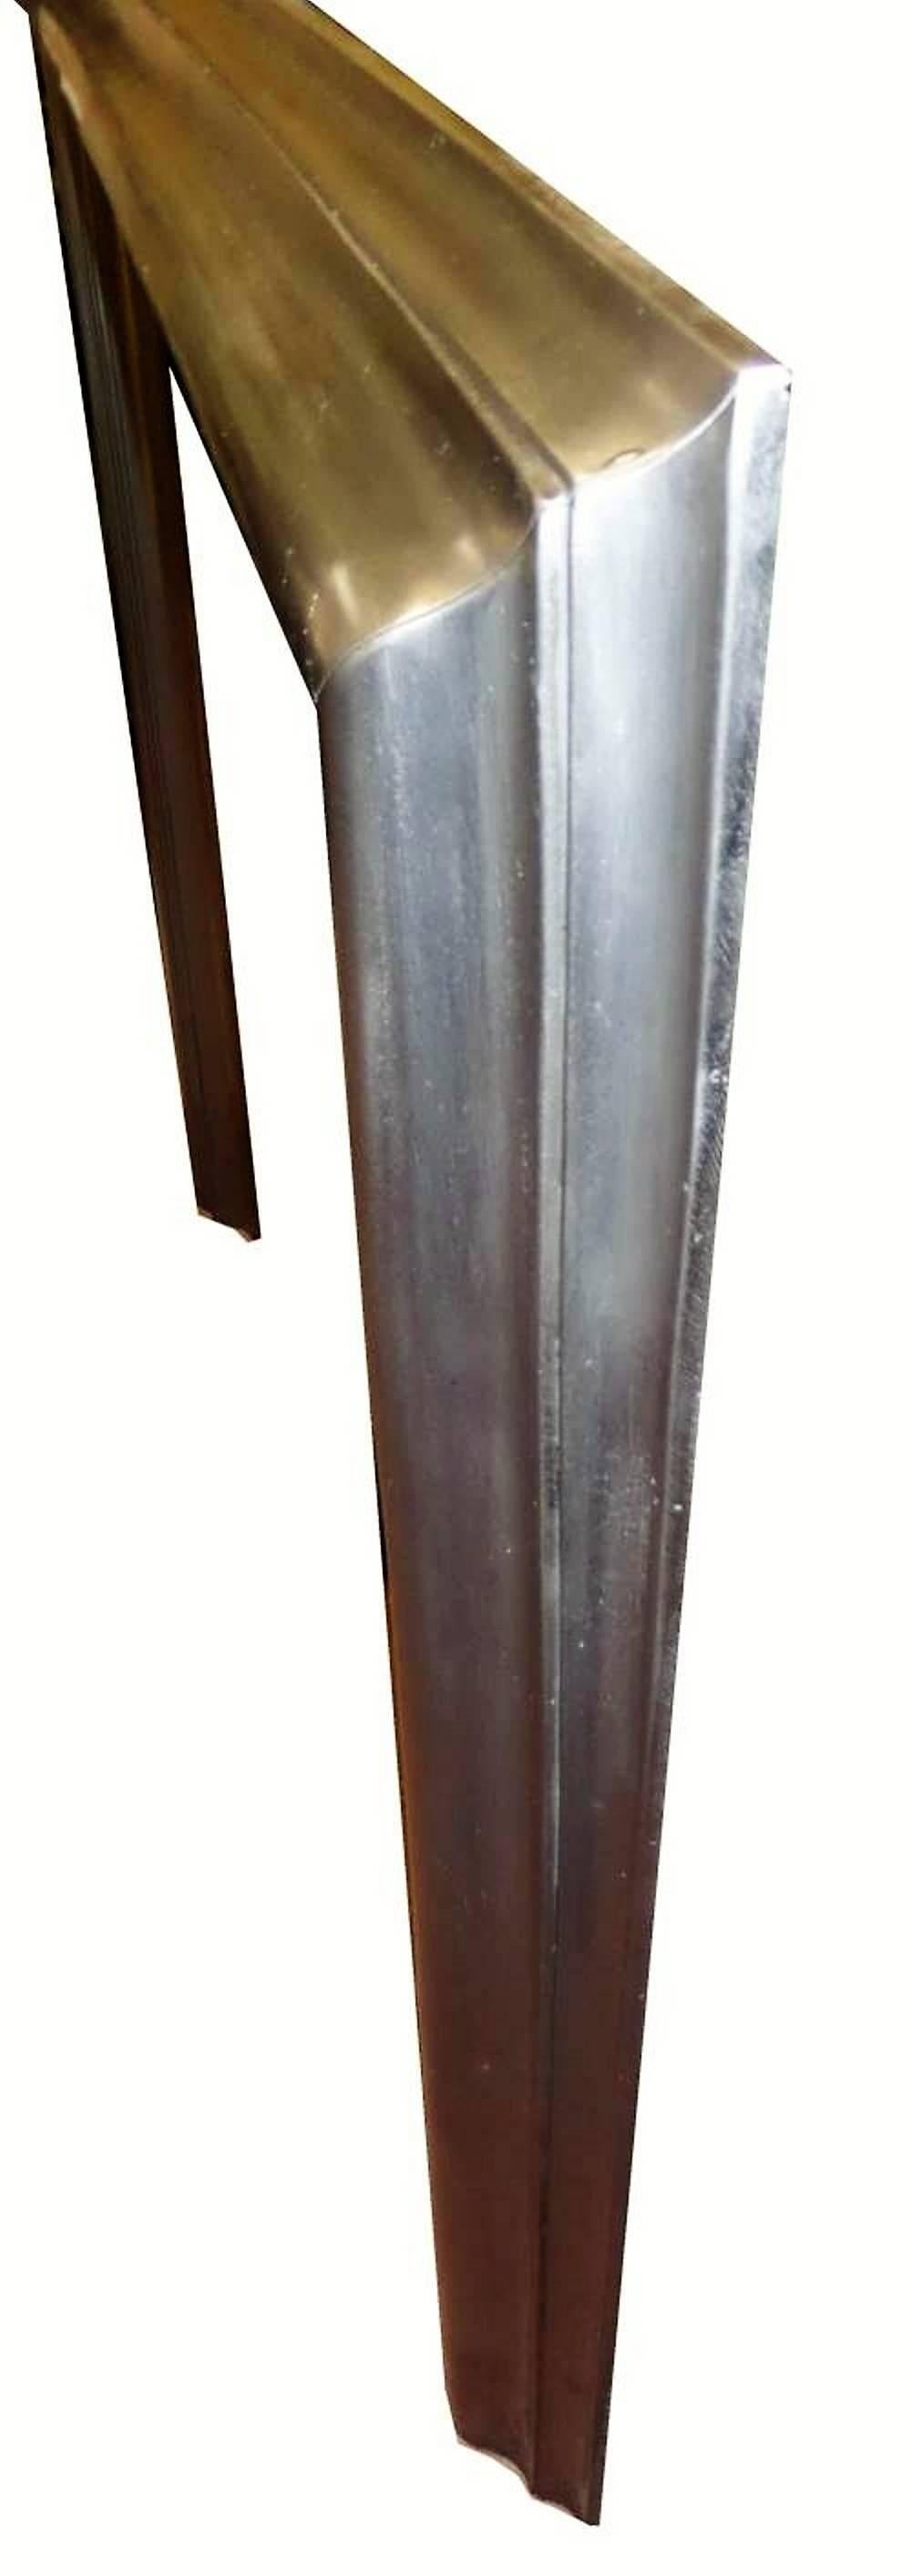 Art Deco Mid-20th Century Burnished Cast Iron Fireplace Surround For Sale